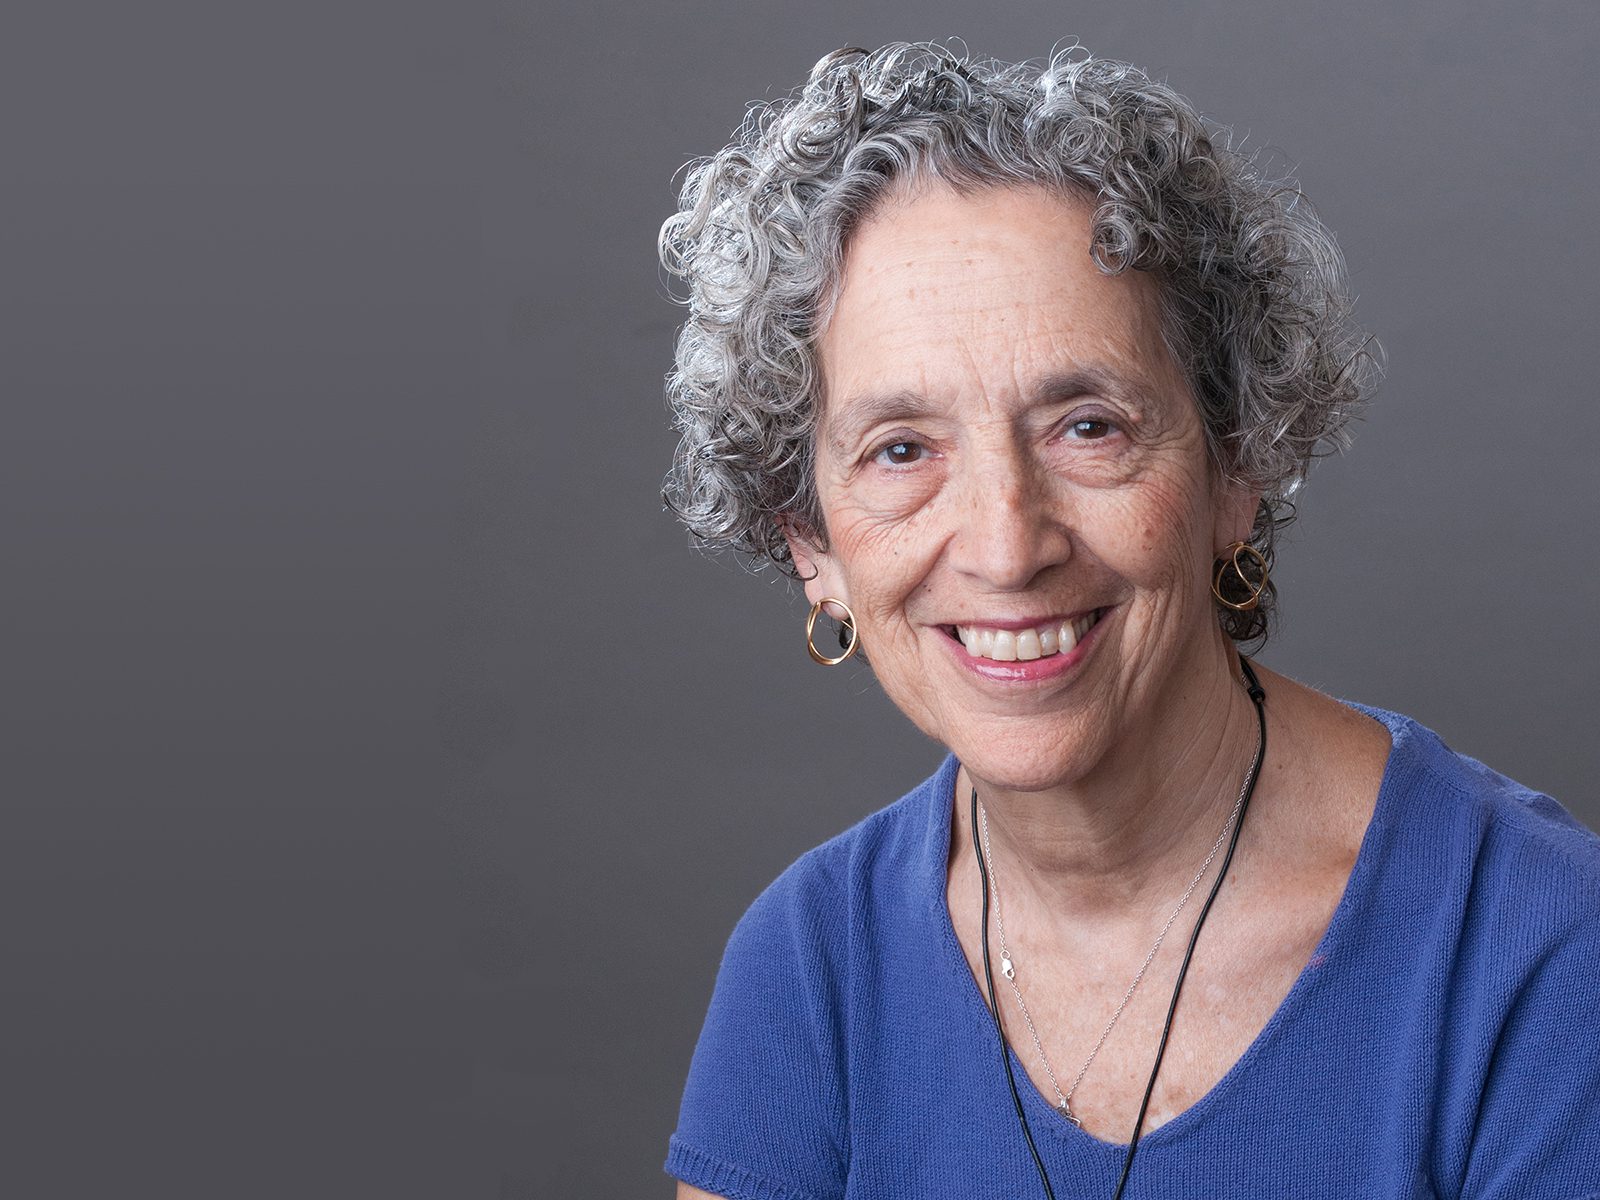 Eight over 80: Ruth Messinger’s long second act honors ‘an obligation to respond’